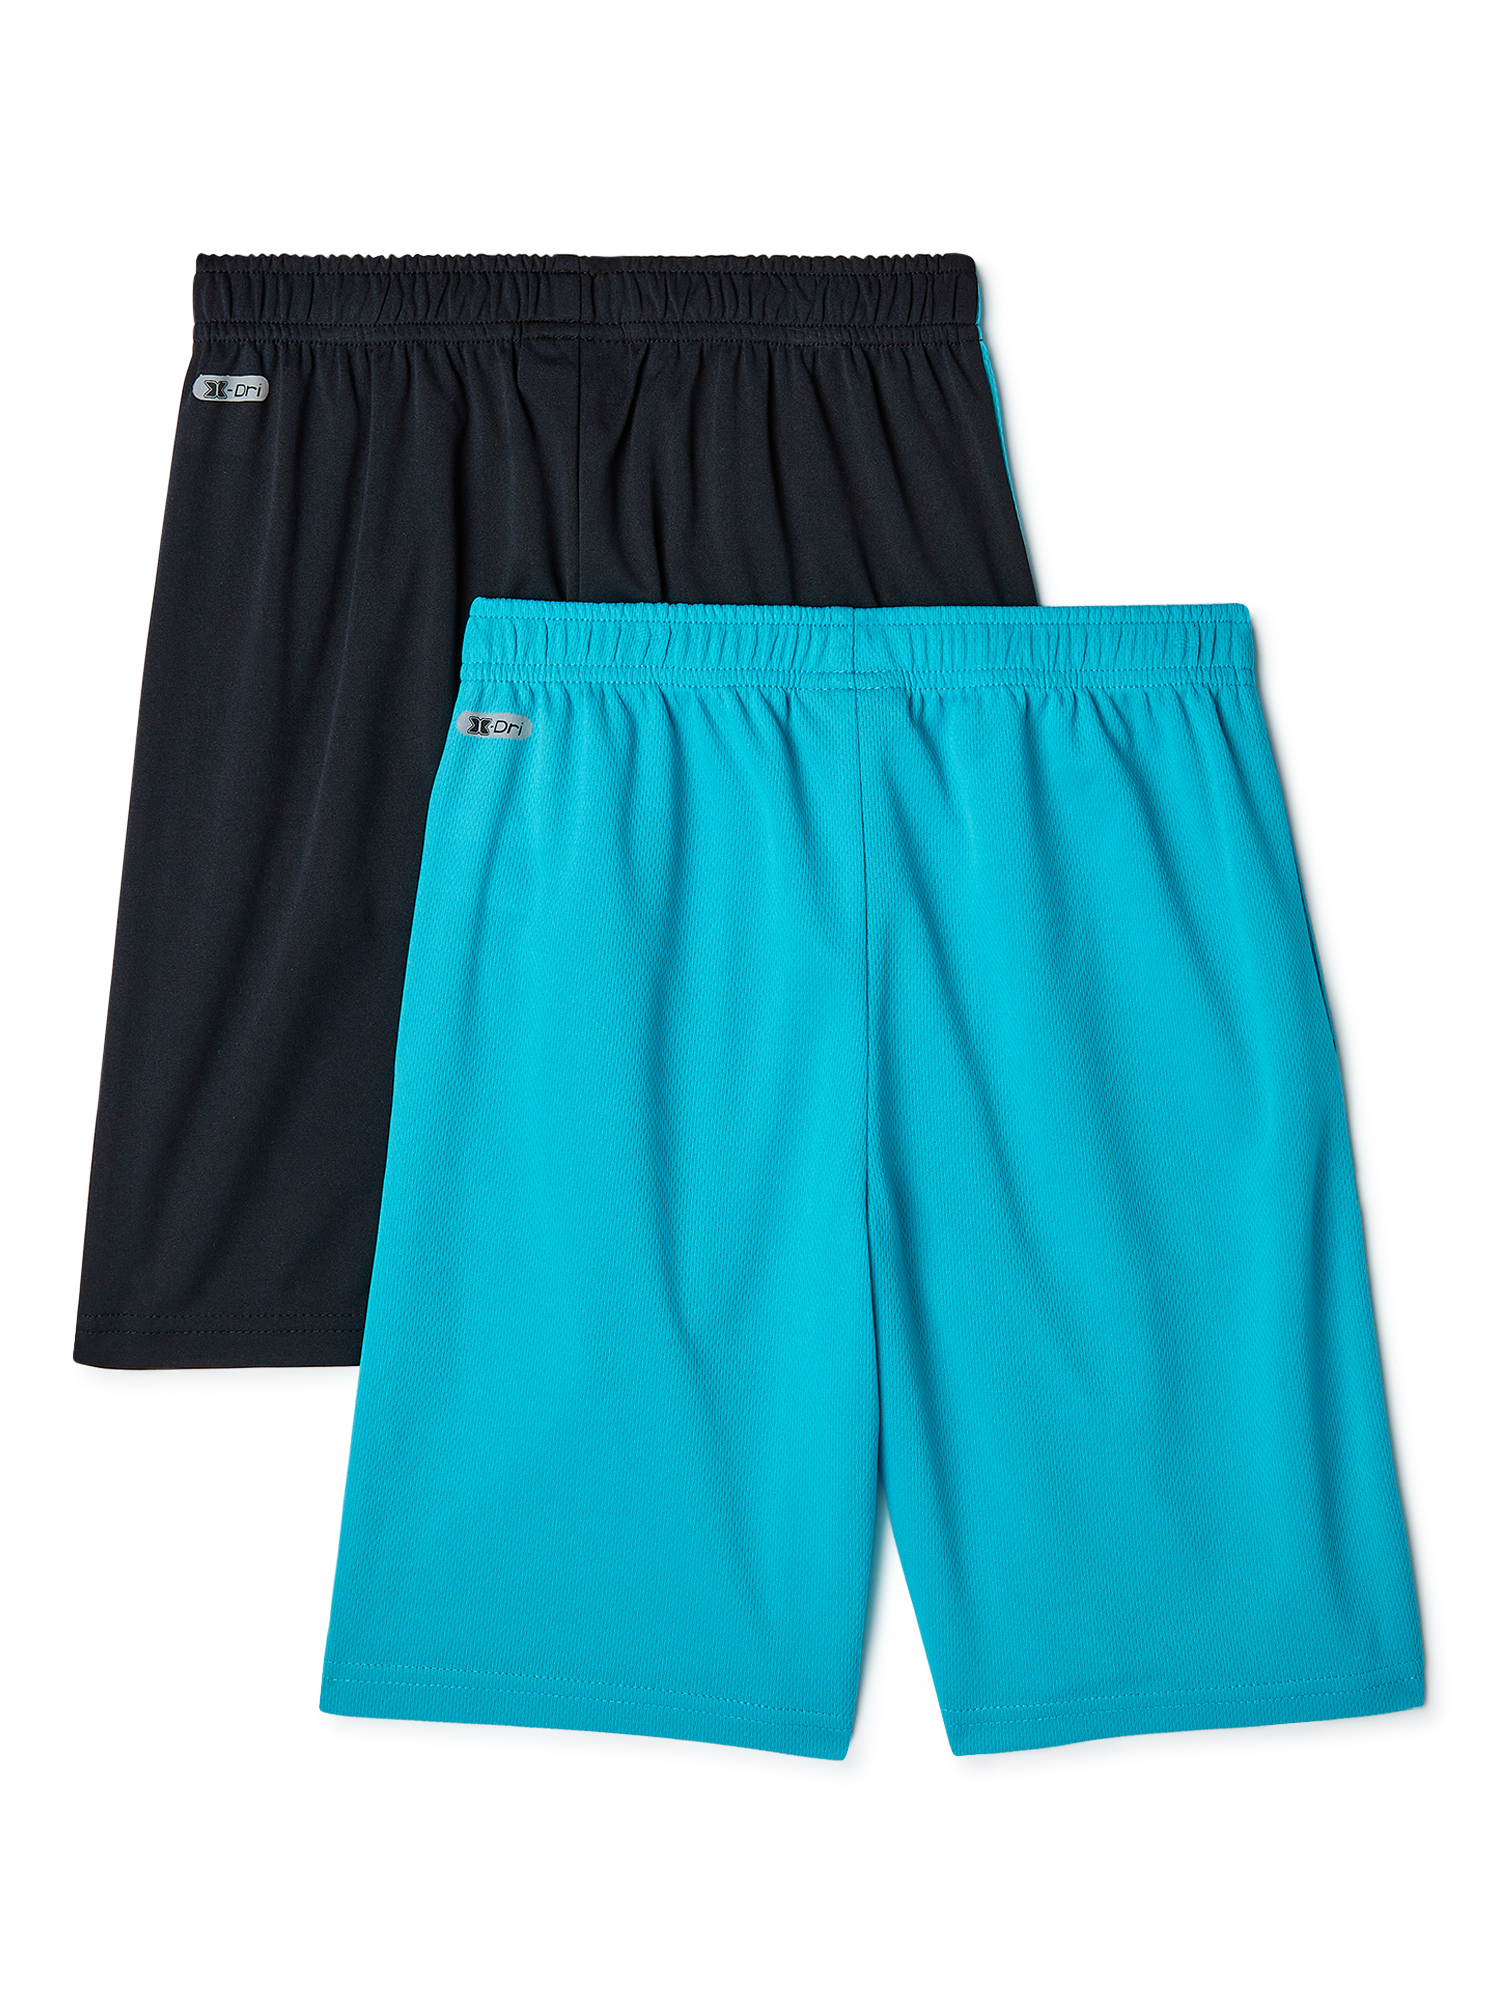 RBX Boys Neon Performance Shorts, 2-Pack, Sizes 4-18 - image 2 of 3